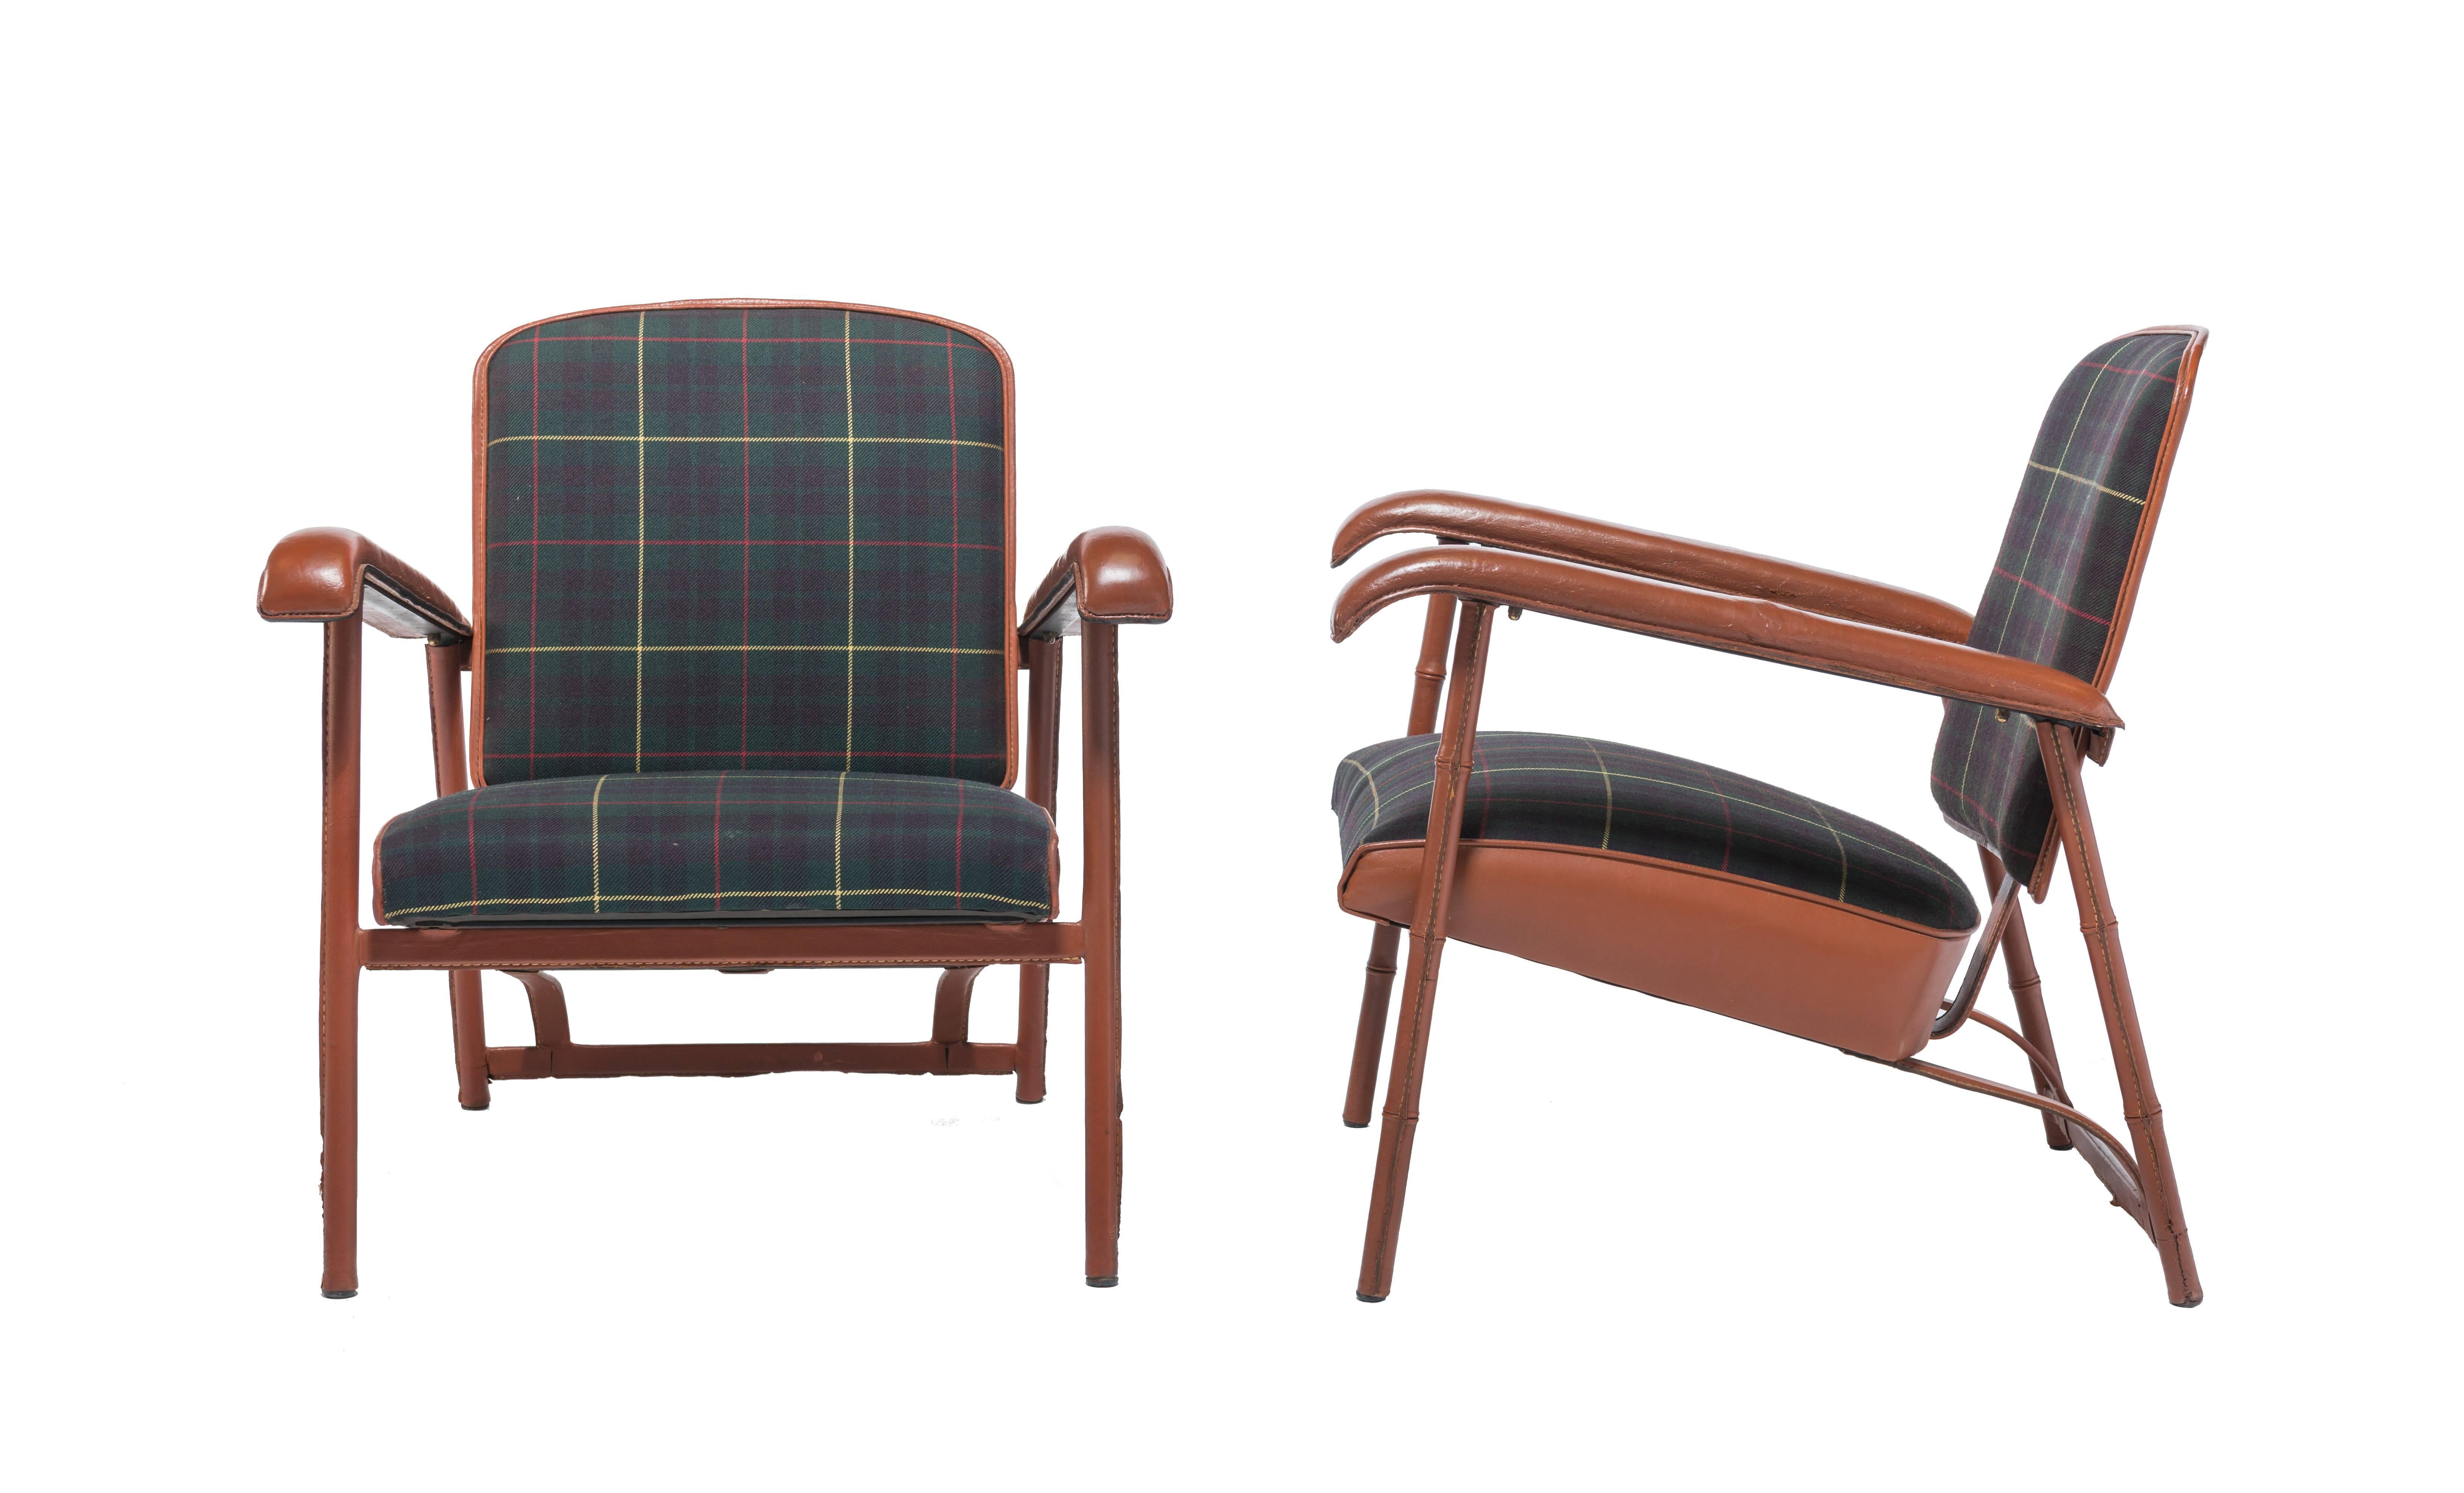 Rare and handsome pair of Adnet lounge chairs with original Tartan plaid wool upholstery. This pair of “Mr. and Mrs.